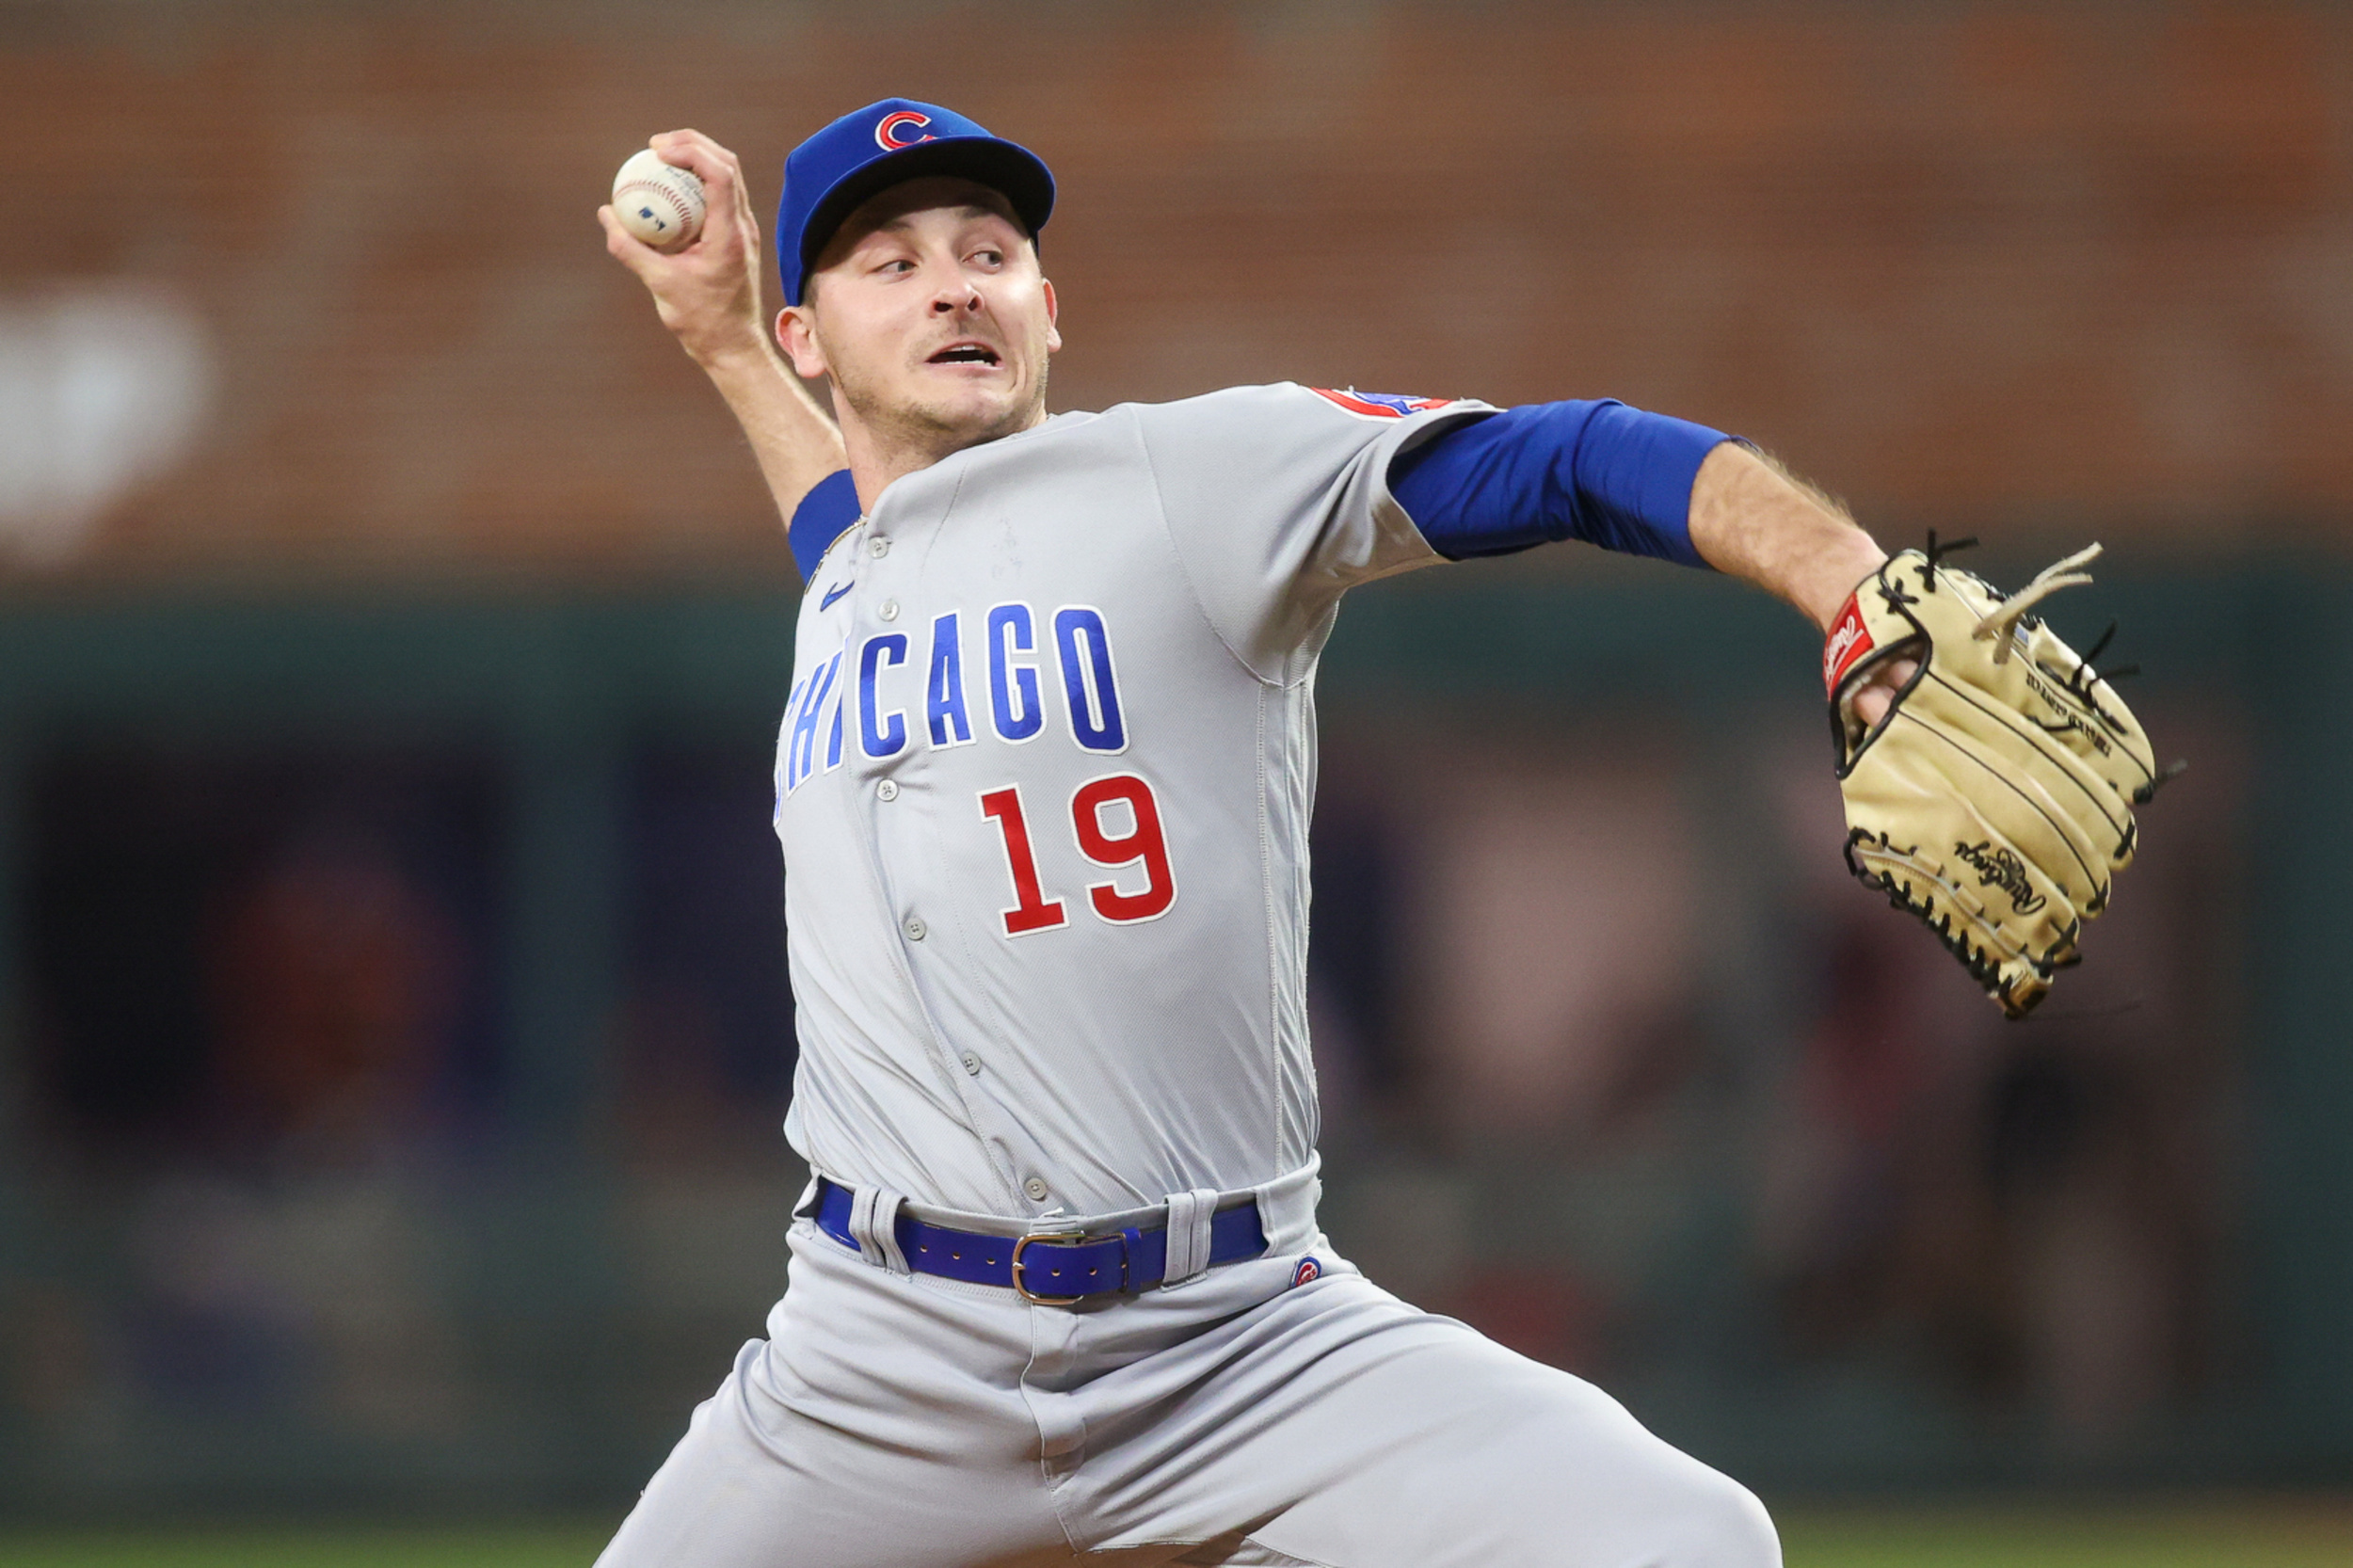 cubs recall two relievers from triple-a